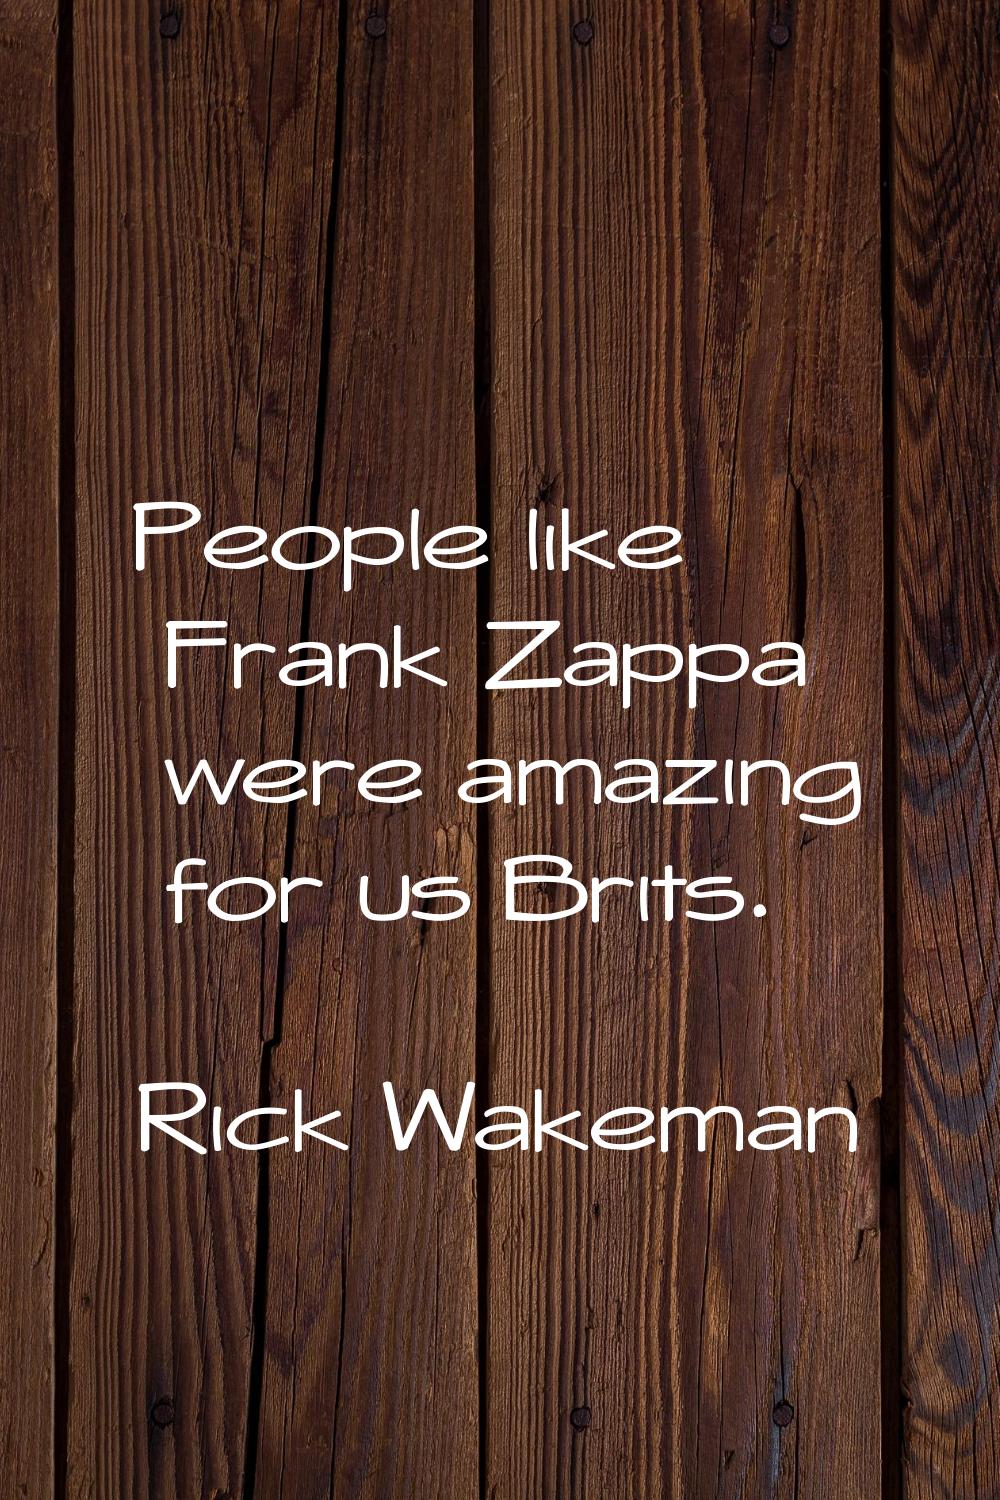 People like Frank Zappa were amazing for us Brits.